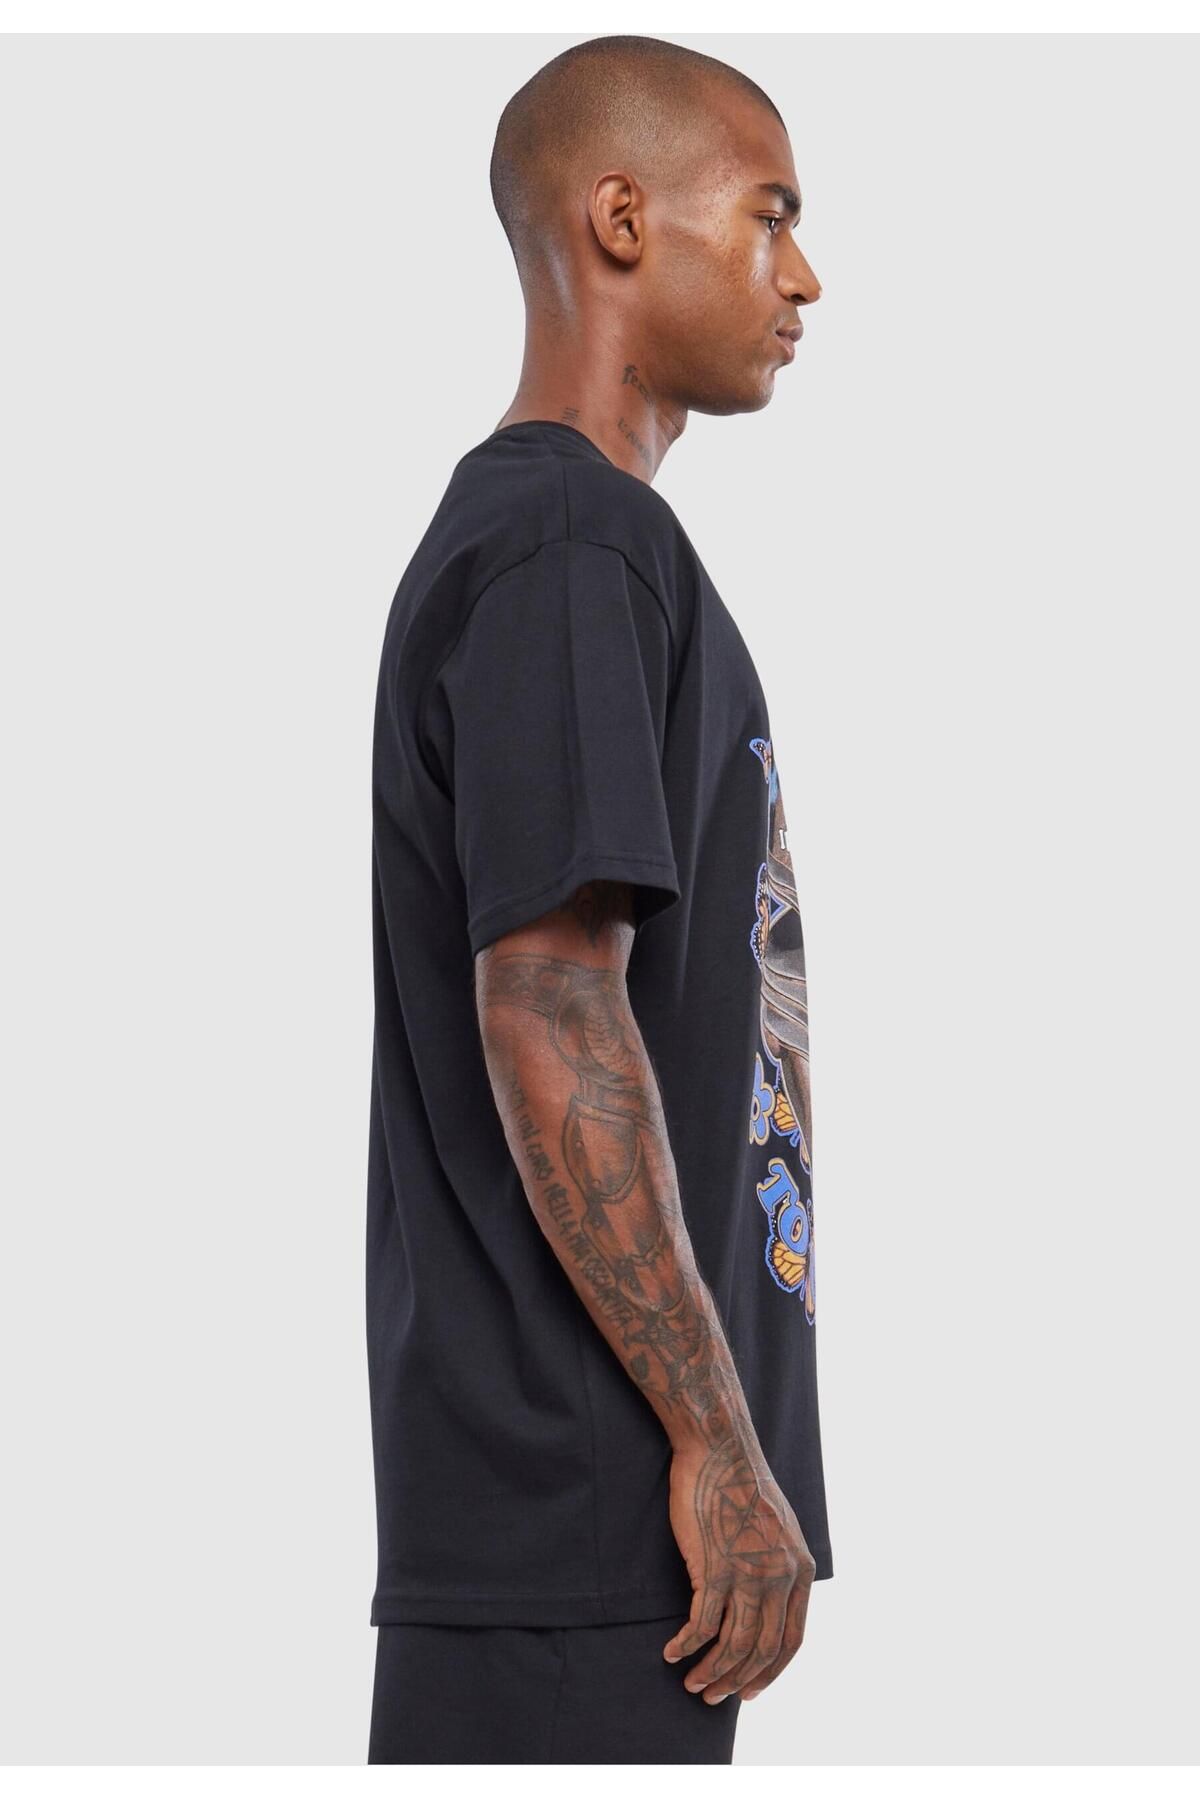 - - Oversize Black Tee Mister Trendyol T-Shirt Upscale by -